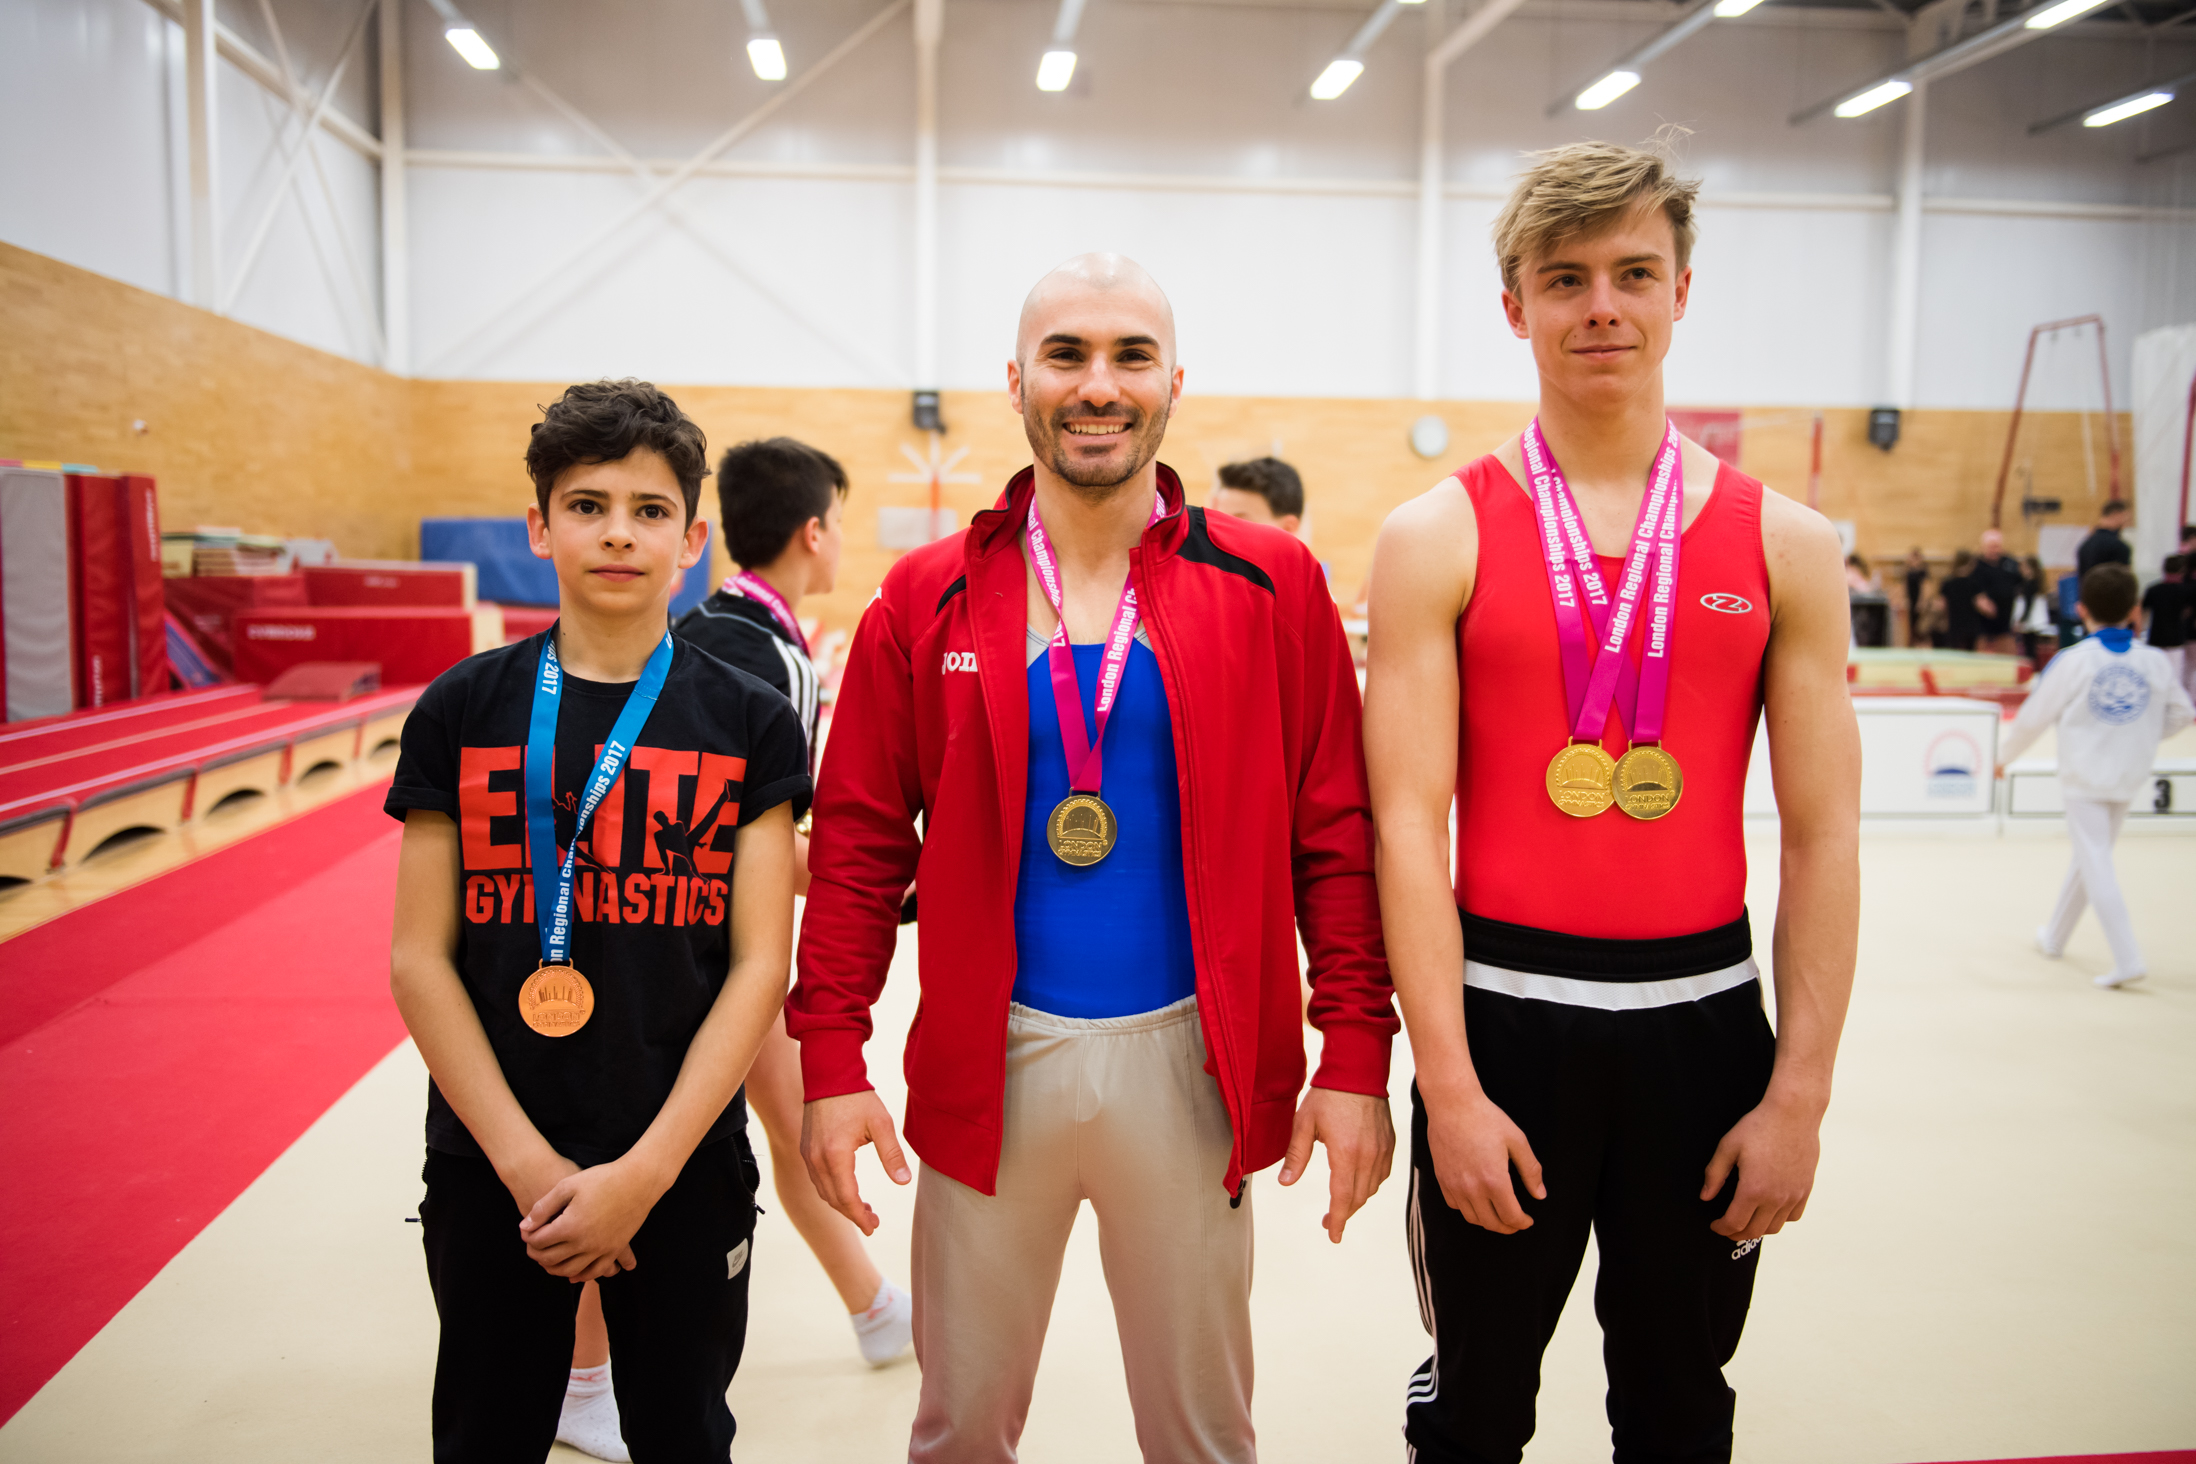 coach Stef and his gymnasts won medals from the London Championships